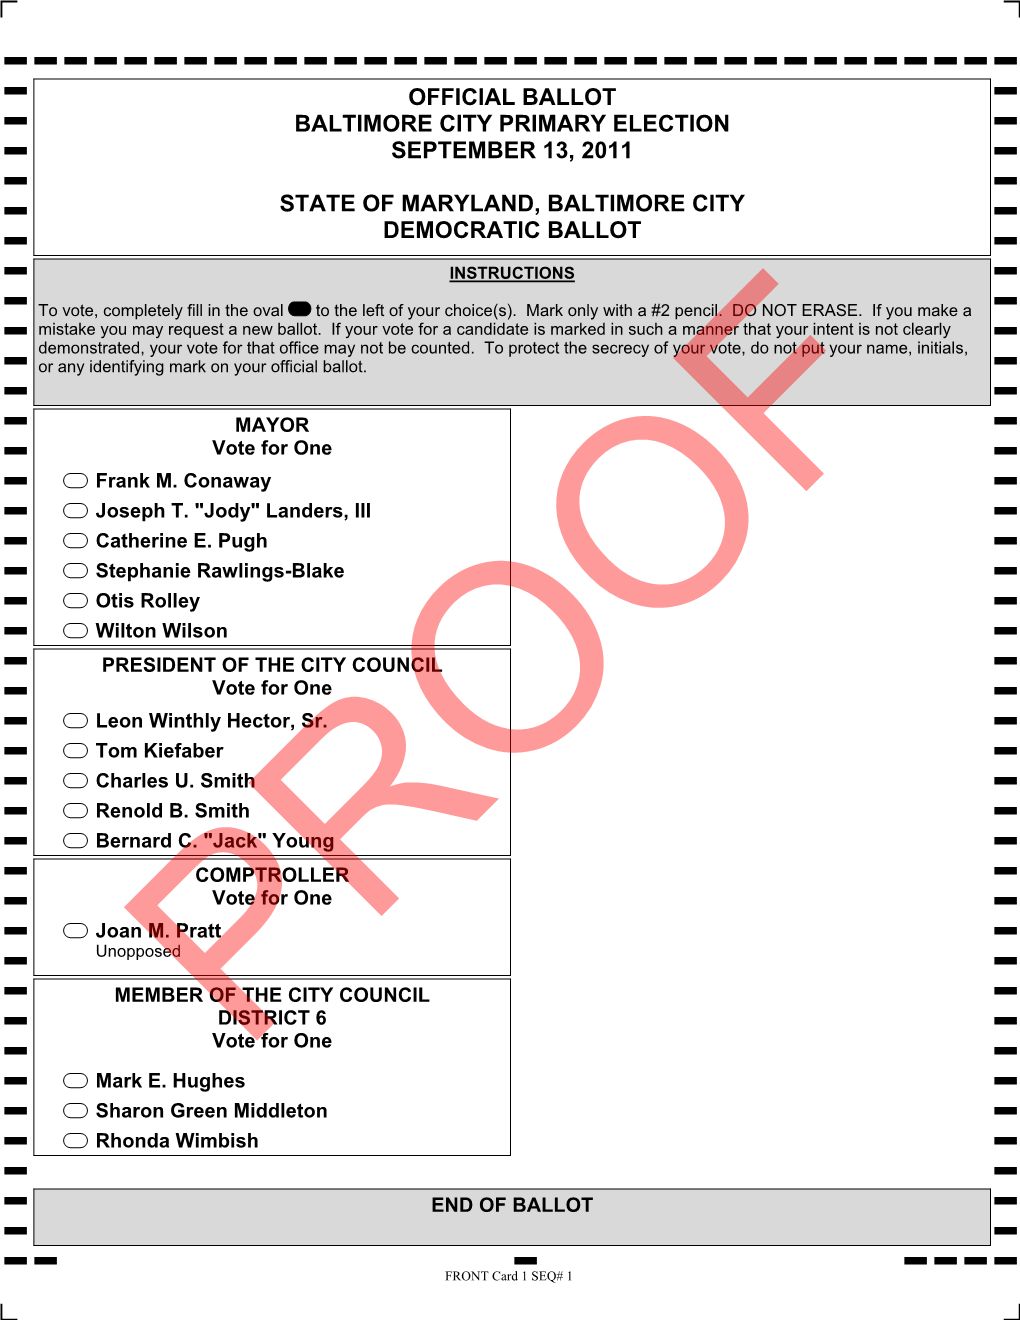 Sample Ballot Proofs for the 2011 Baltimore City Mayoral Primary